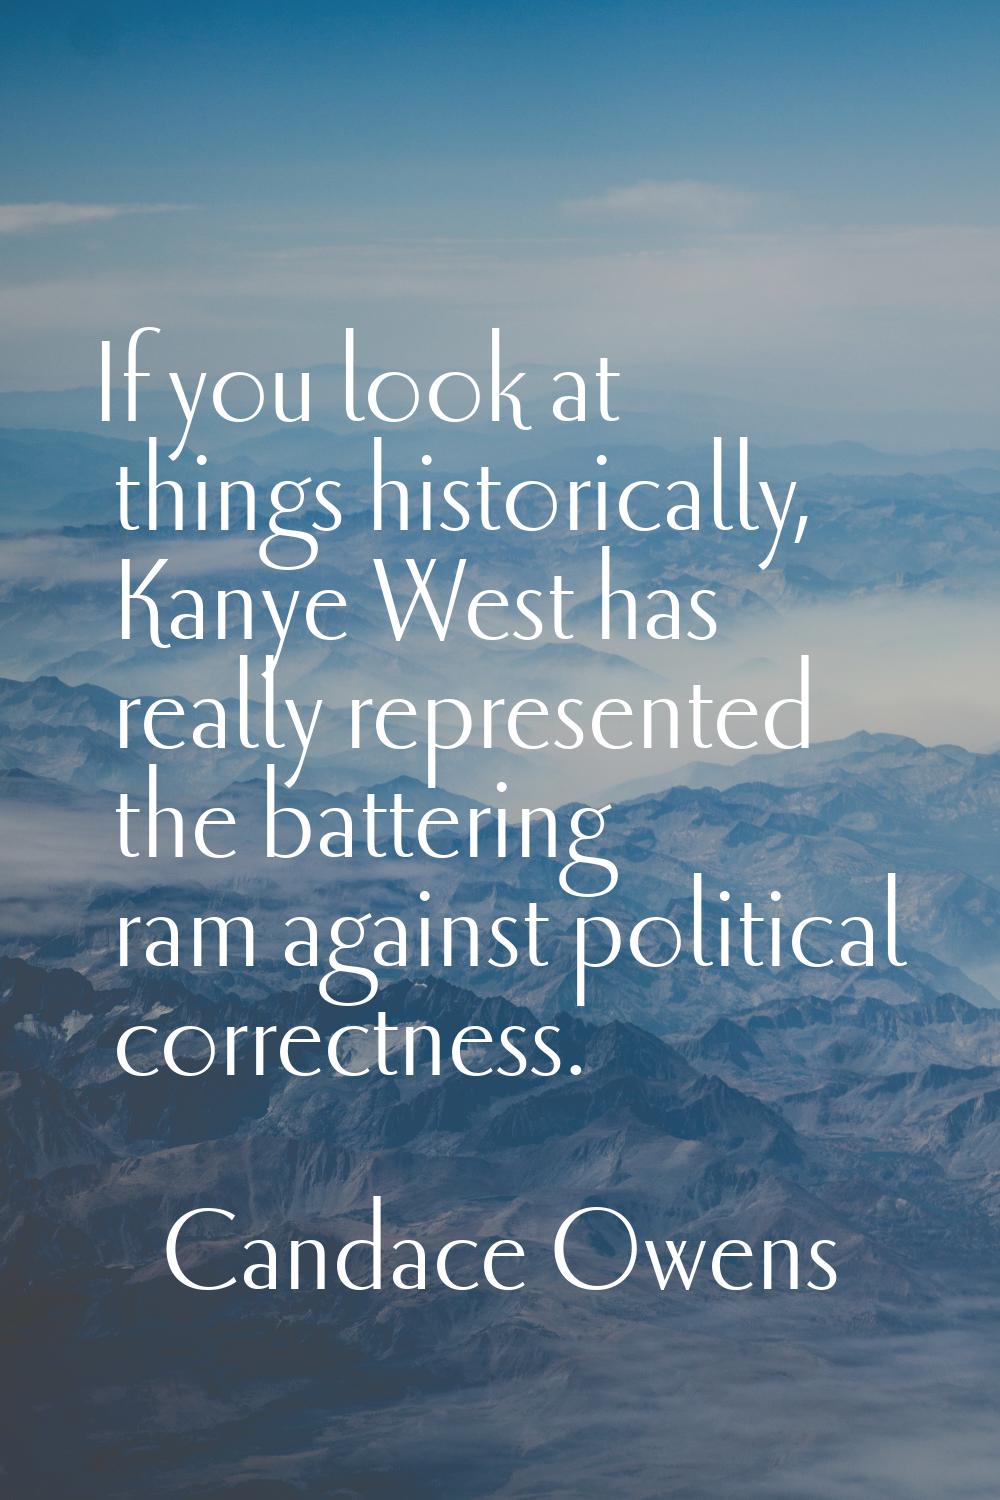 If you look at things historically, Kanye West has really represented the battering ram against pol